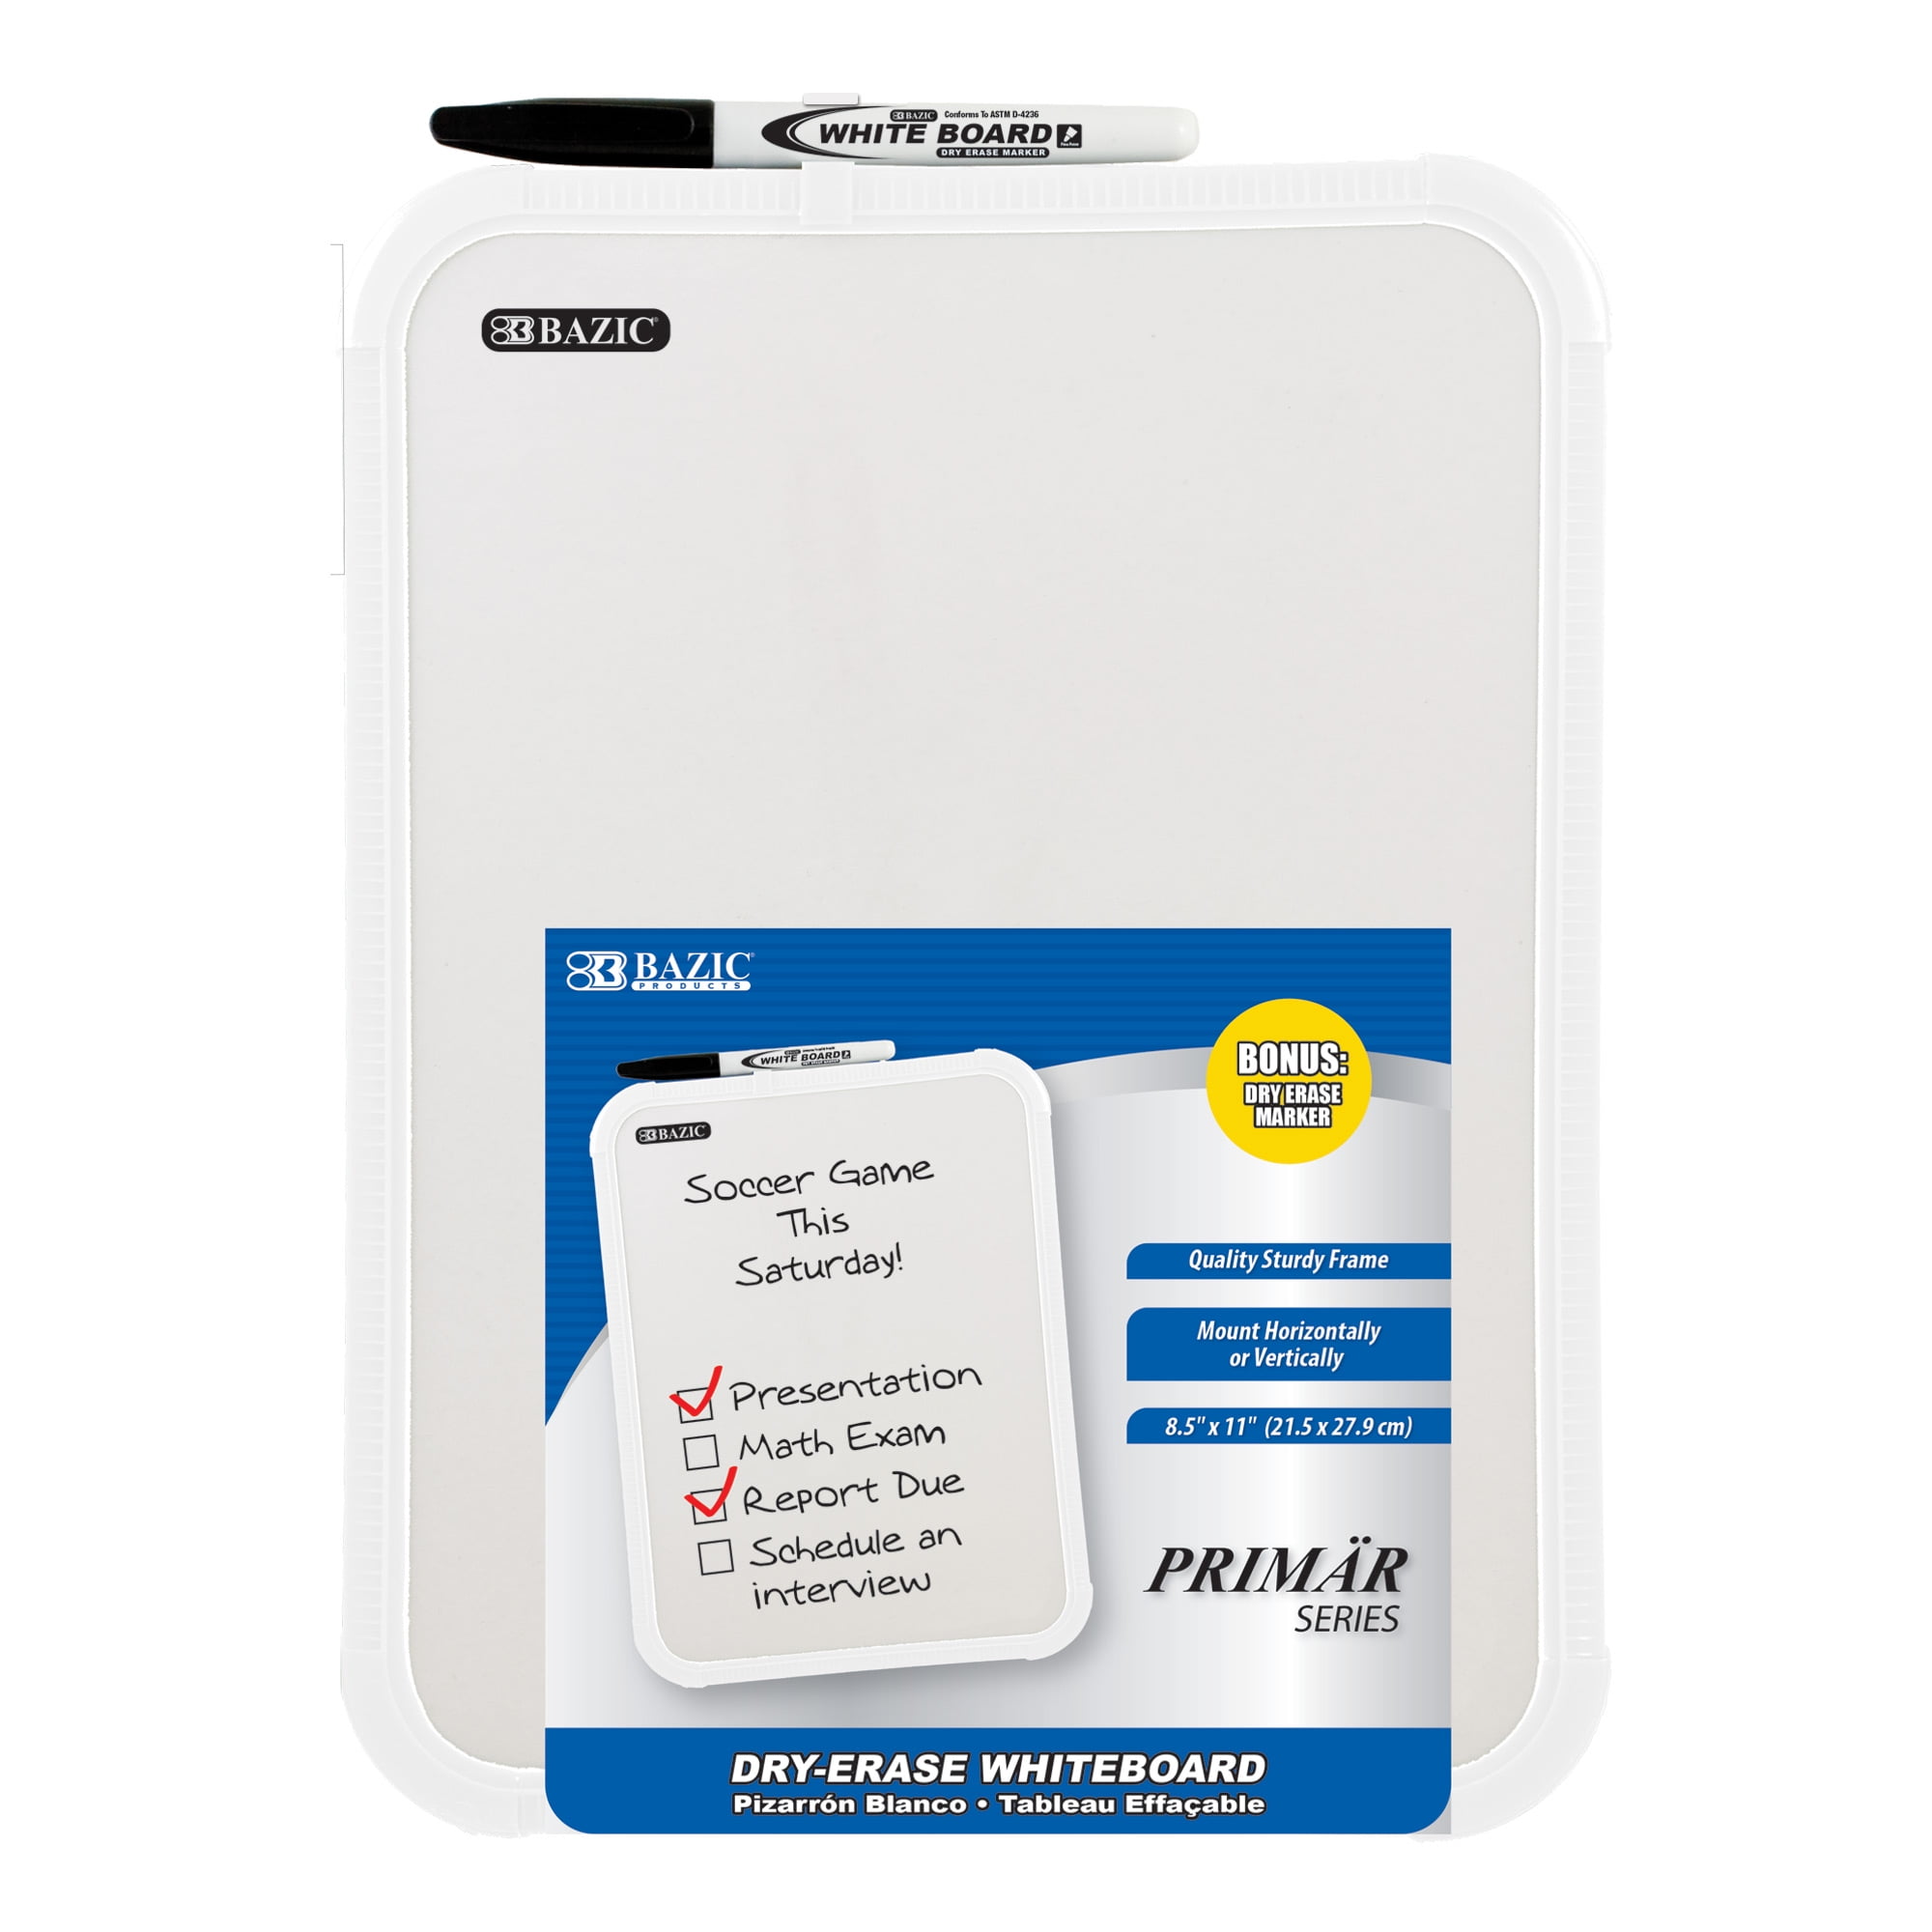 Details about   Magnetic Whiteboard Dry Erase Board 8-1/2" x 11" White Board for Wall Marker 